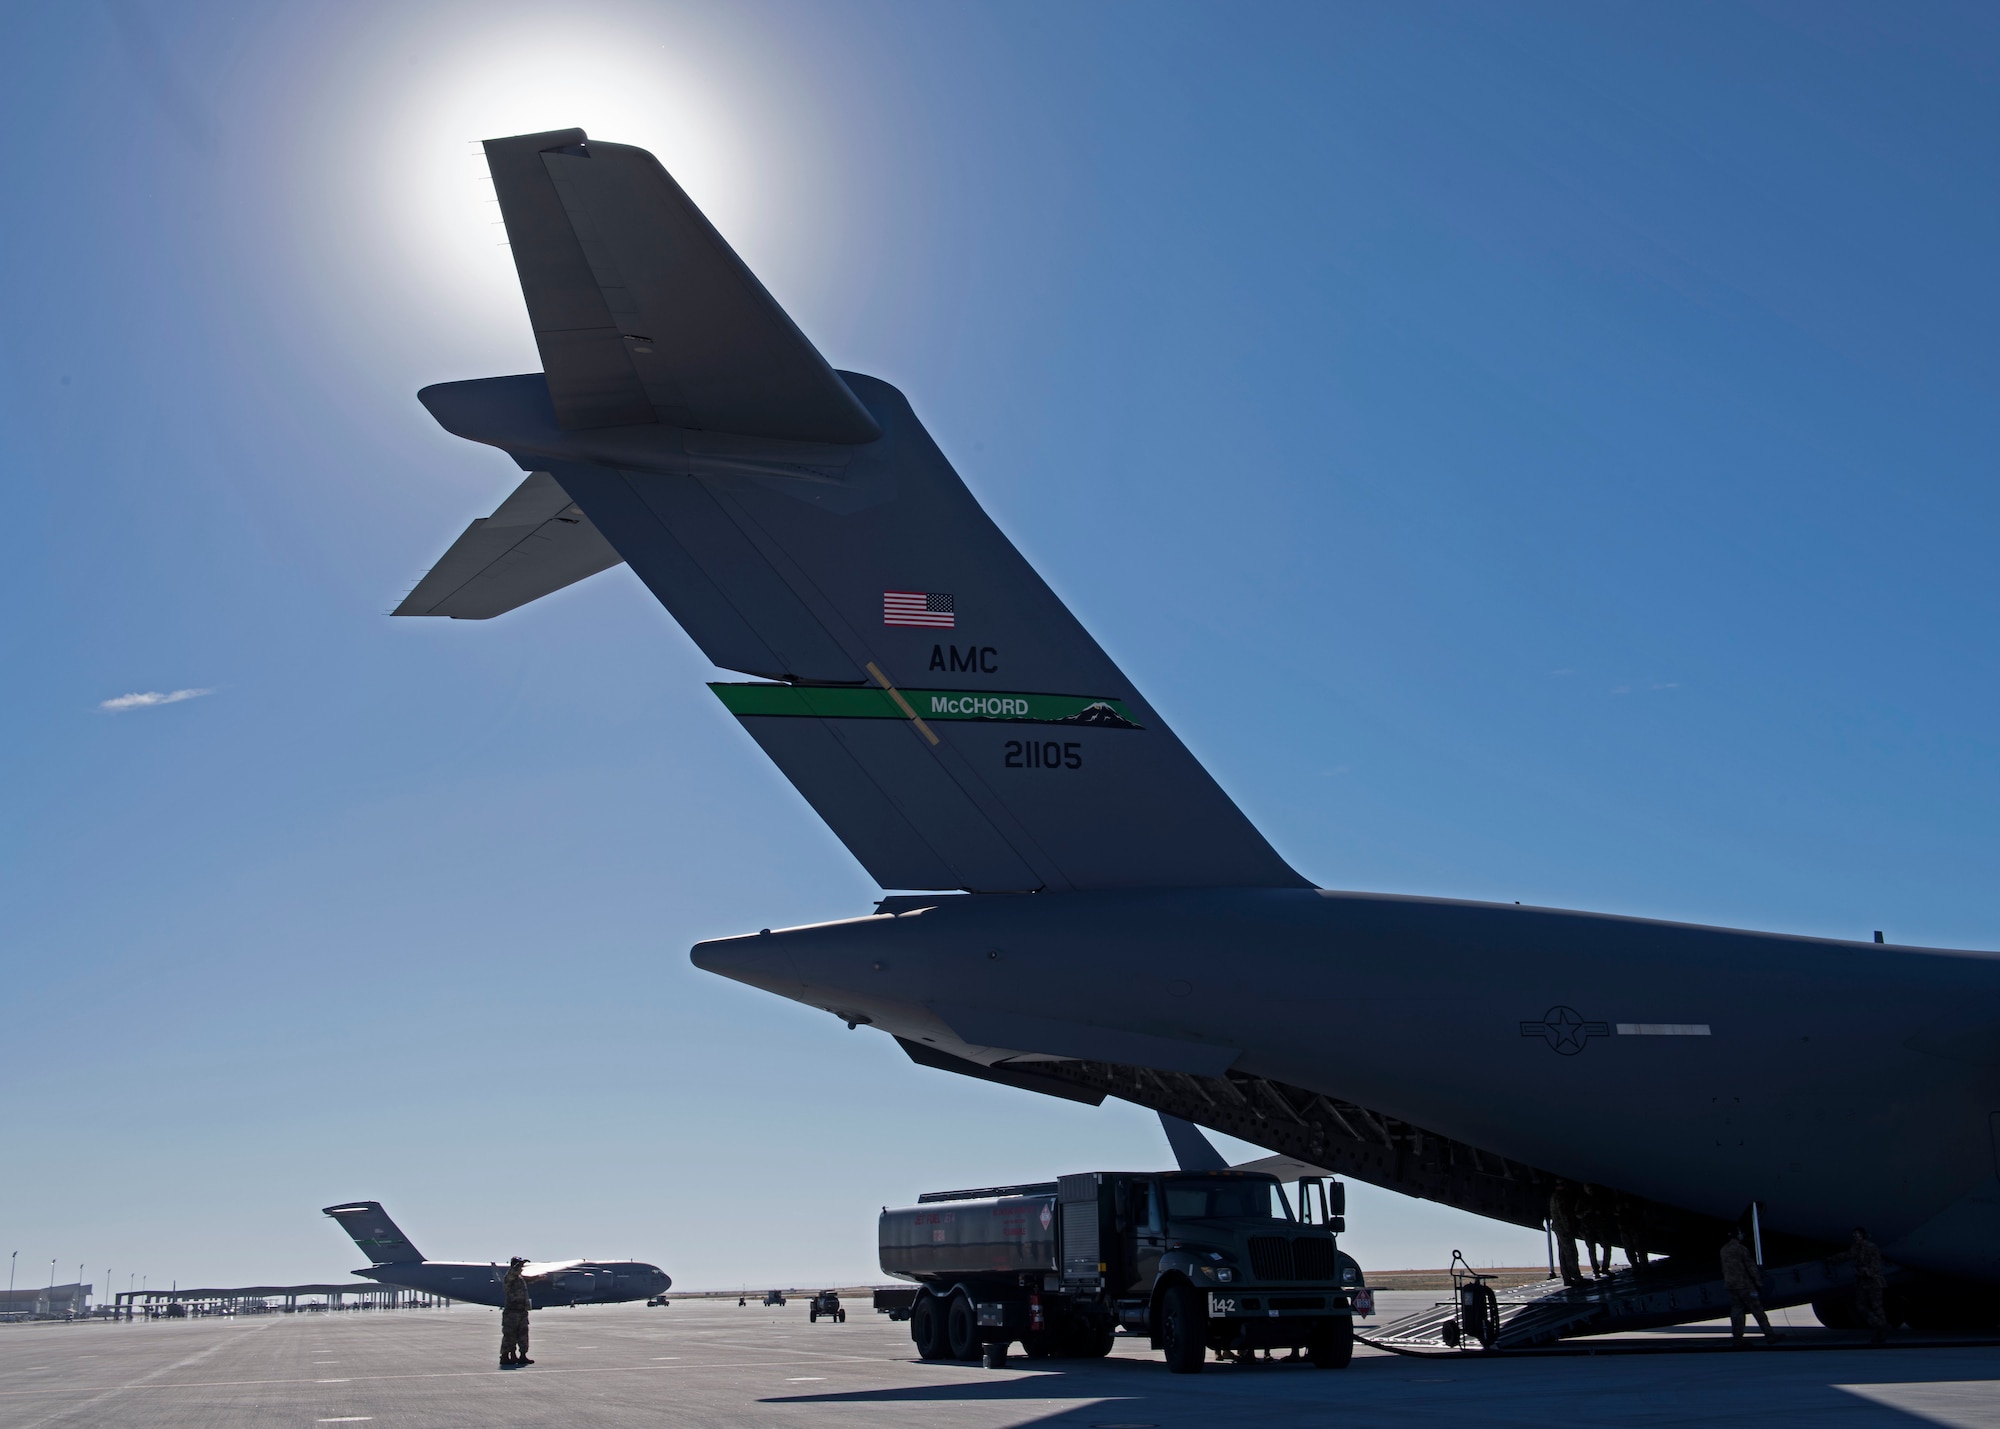 U.S. Airmen with the simulated 7th Expeditionary Airlift Squadron fuel a C-17 Globemaster III aircraft during Exercise Rainier War 22B at Mountain Home Air Force Base, Idaho, Oct. 17, 2022. Airmen from multiple Team McChord units came together to form the 7th EAS during Rainier War 22B; which is a full-scale readiness exercise simulating a deployment in support of U.S. Indo-Pacific areas of responsibility. (U.S. Air Force photo by Staff Sgt. Zoe Thacker)